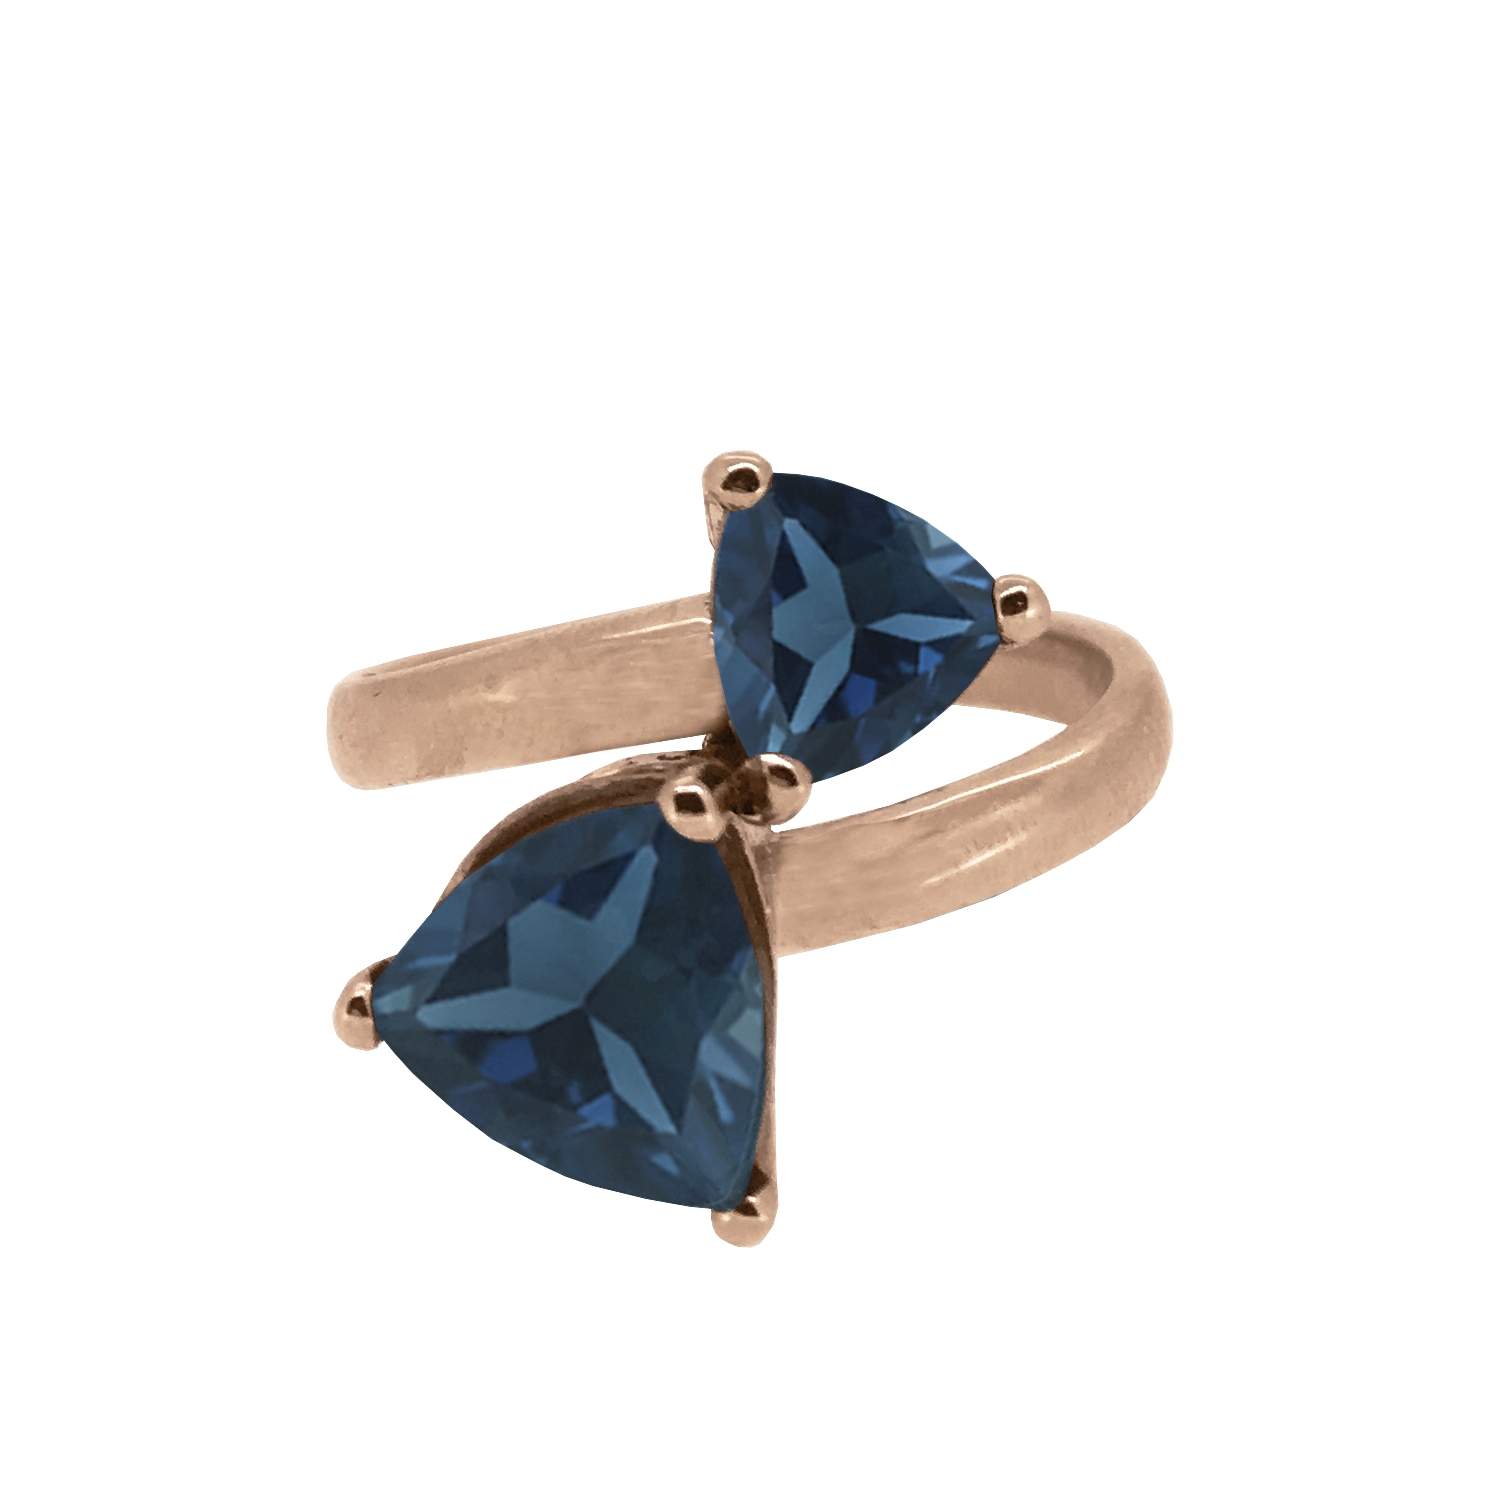 Twilight Collection Trilliant Cut Teal Topaz Ring 9ct Rose Gold copy.jpg